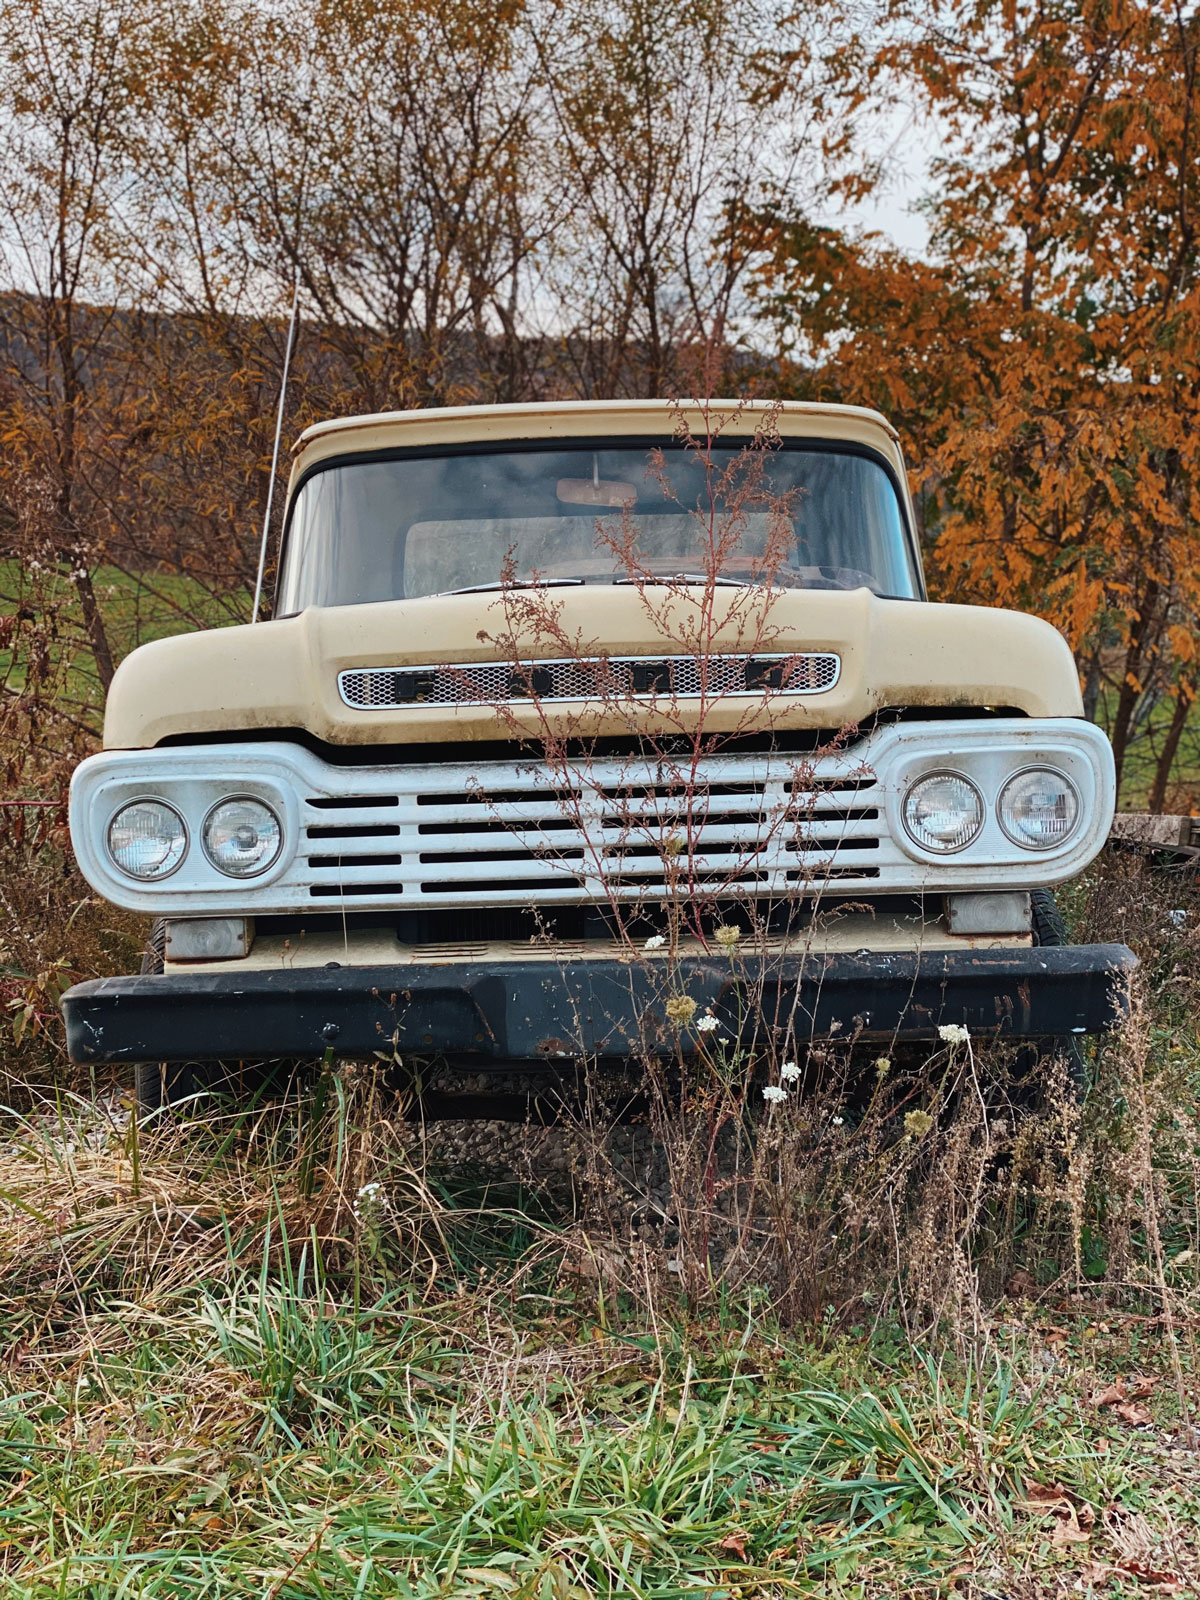 Buying an Old Truck by Stopping When You See It In Someones Yard